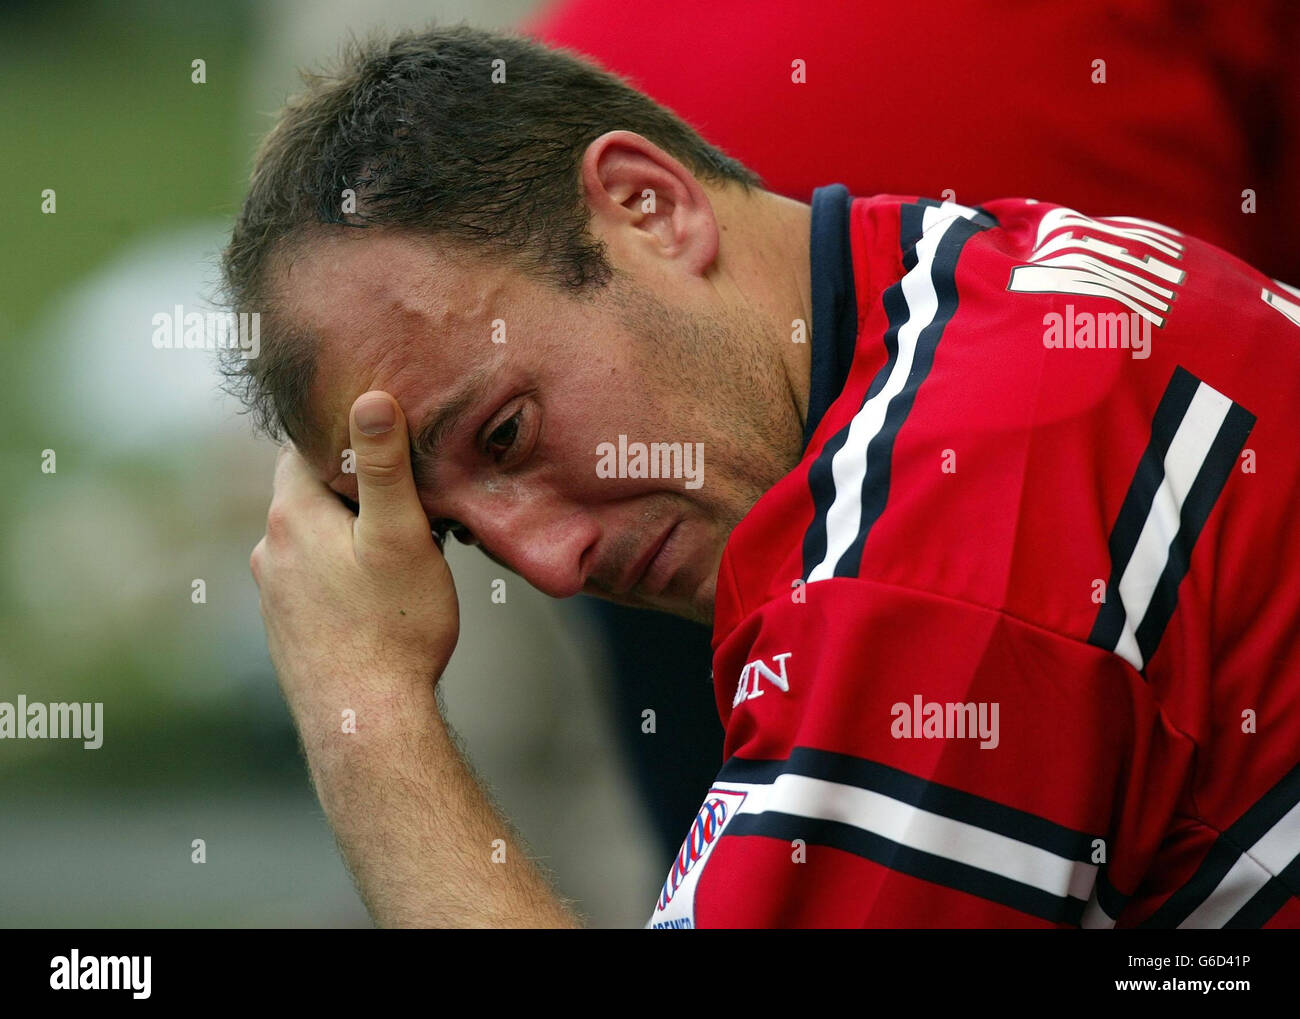 Wasps v Gloucester. Gloucester's Ludovic Mercier is moved to tears after thier defeat by Wasps in the Zurich Premierhip Final at Twickenham, London. Stock Photo